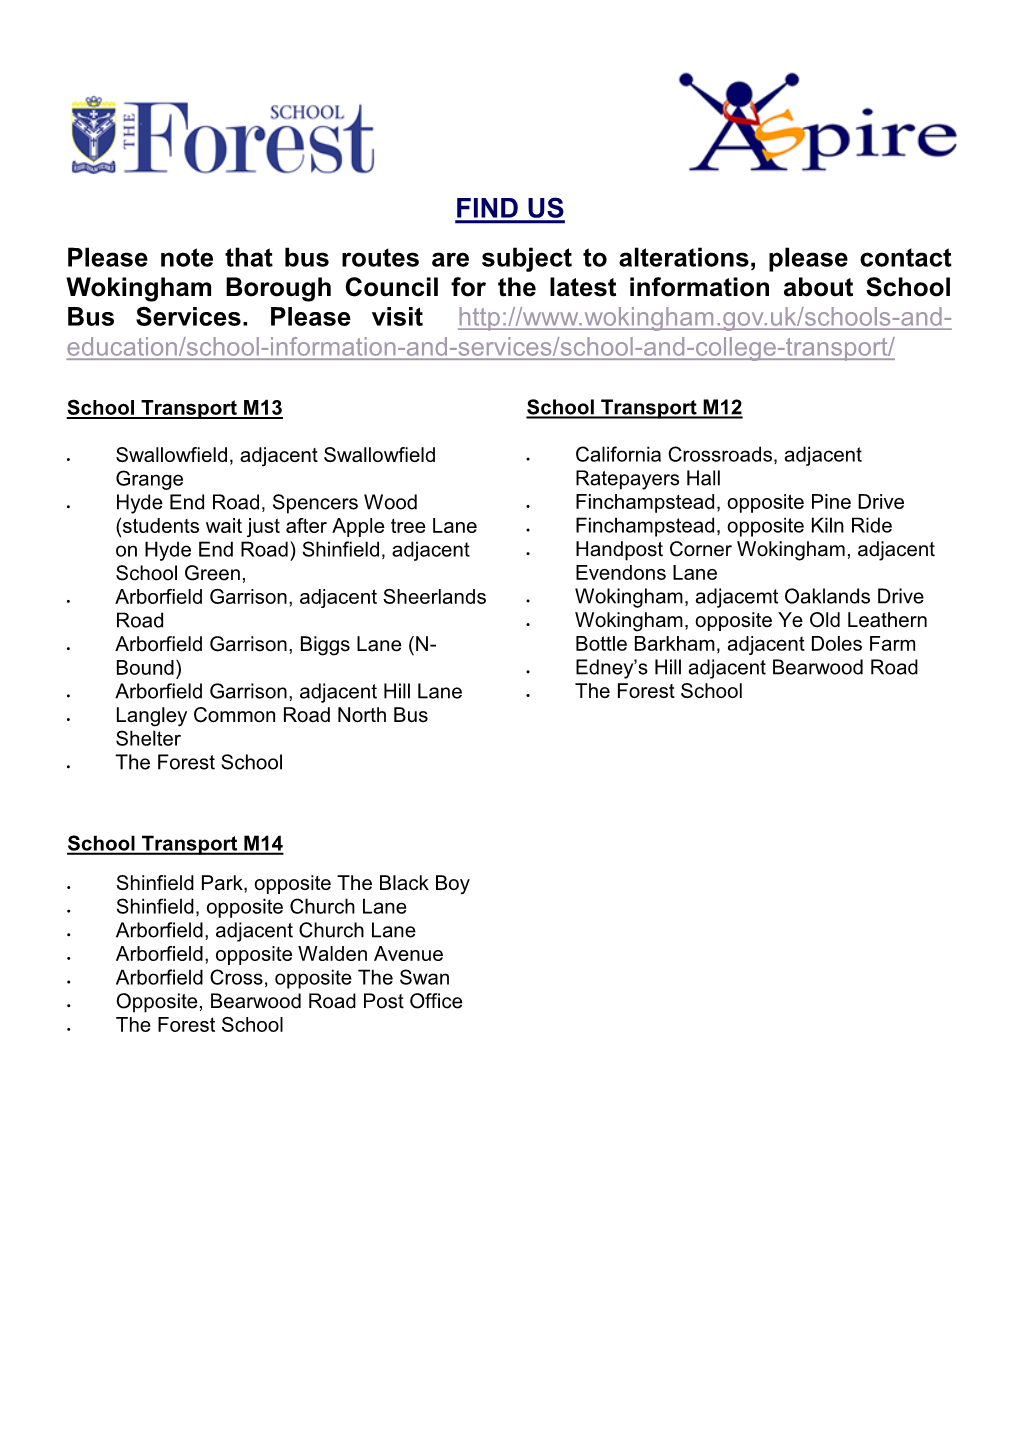 FIND US Please Note That Bus Routes Are Subject to Alterations, Please Contact Wokingham Borough Council for the Latest Information About School Bus Services